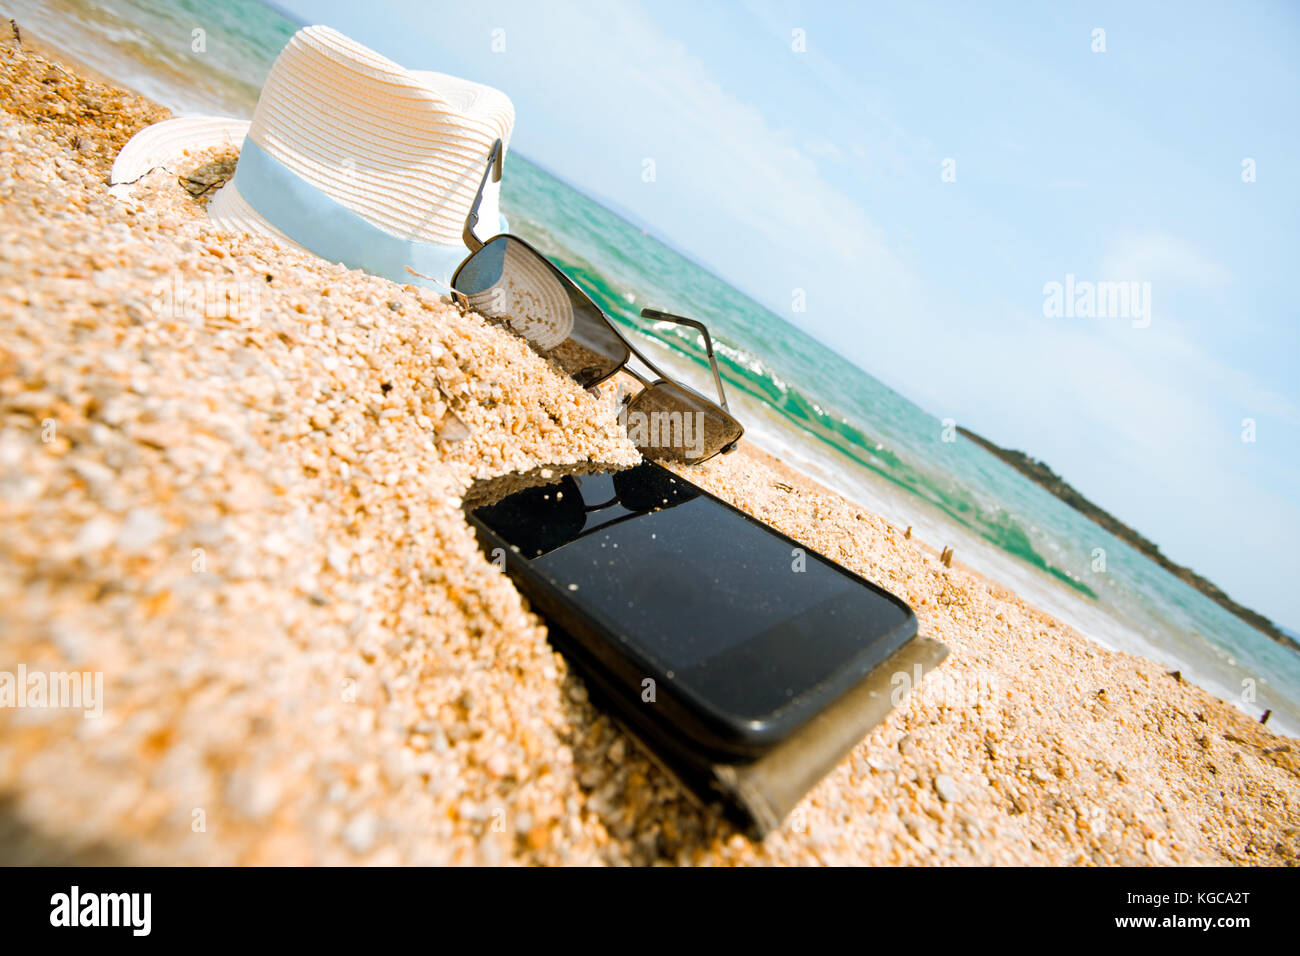 Thrown, half buried in the sand of an ocean or sea shore sand smartphone. Nobody, blue sky with some clouds above. Stock Photo